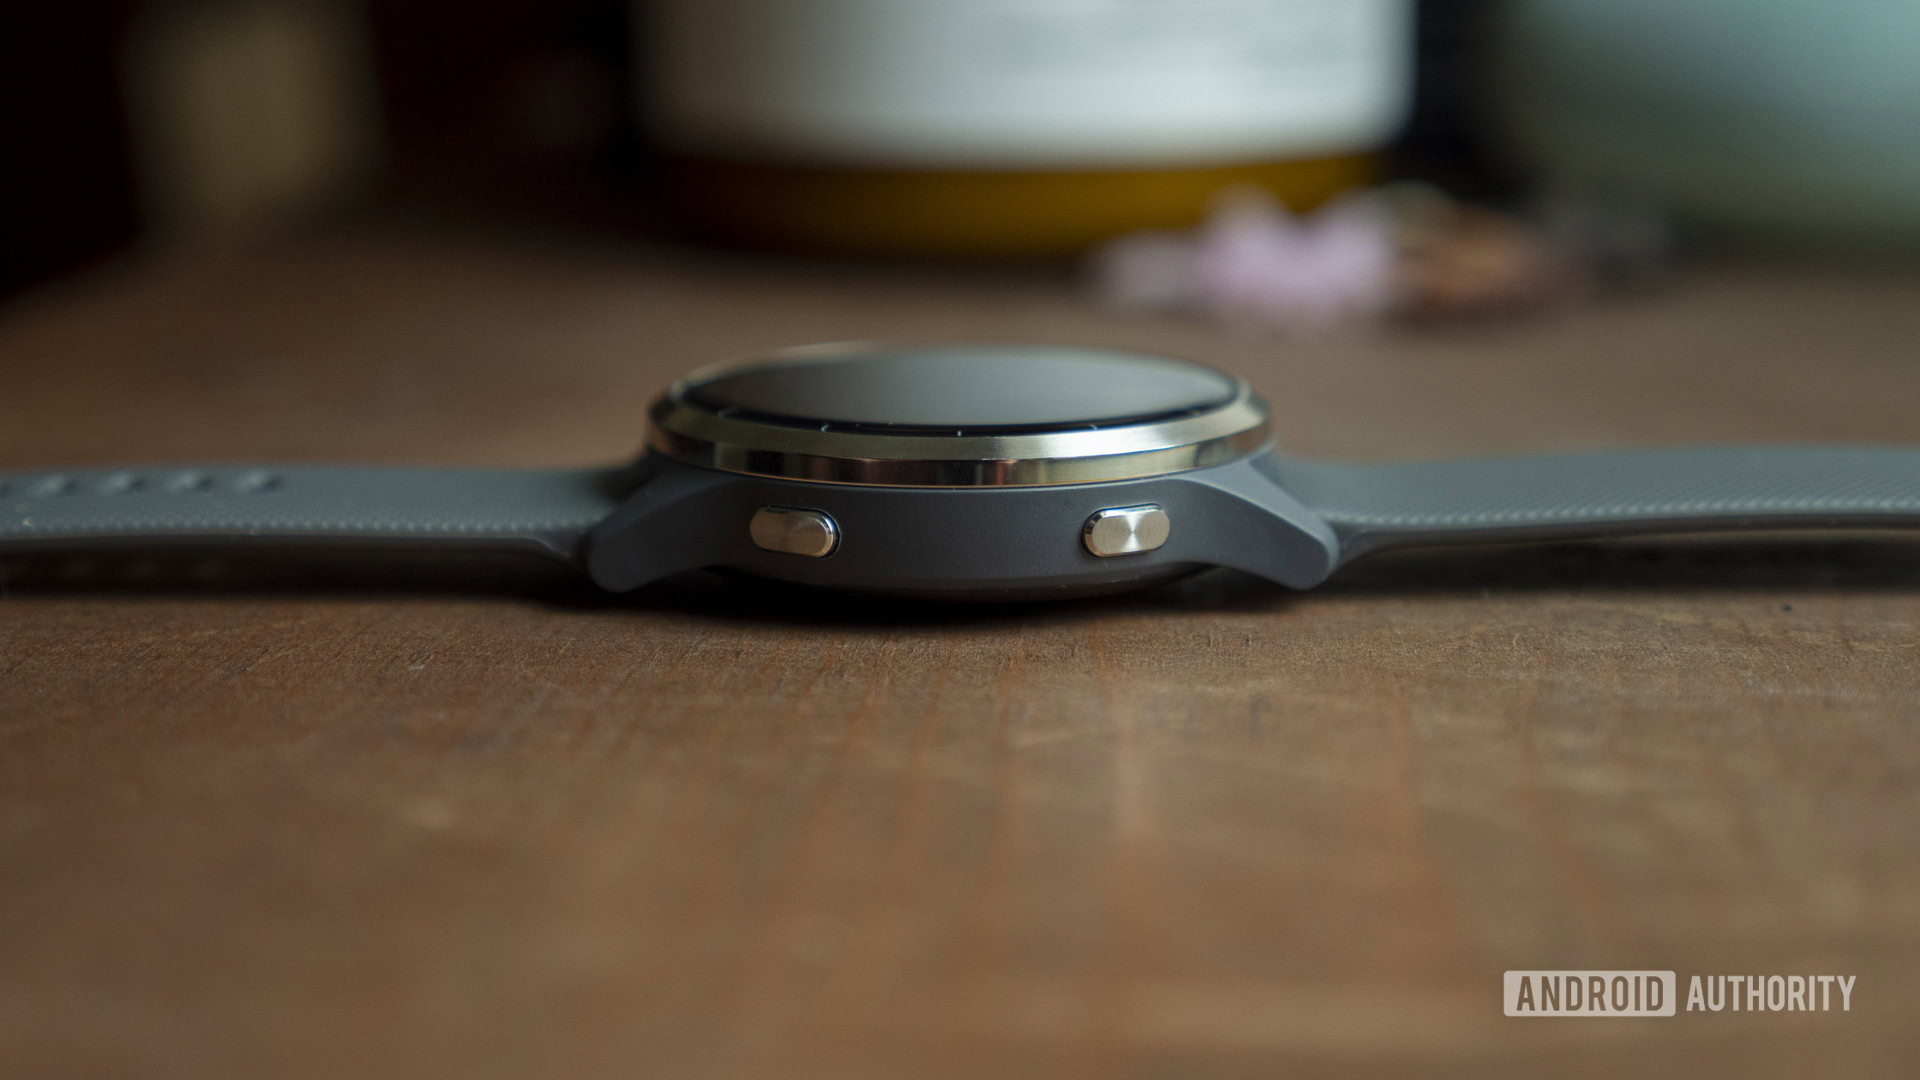 https://www.androidauthority.com/wp-content/uploads/2019/10/garmin-vivoactive-4-review-case-side-buttons.jpg